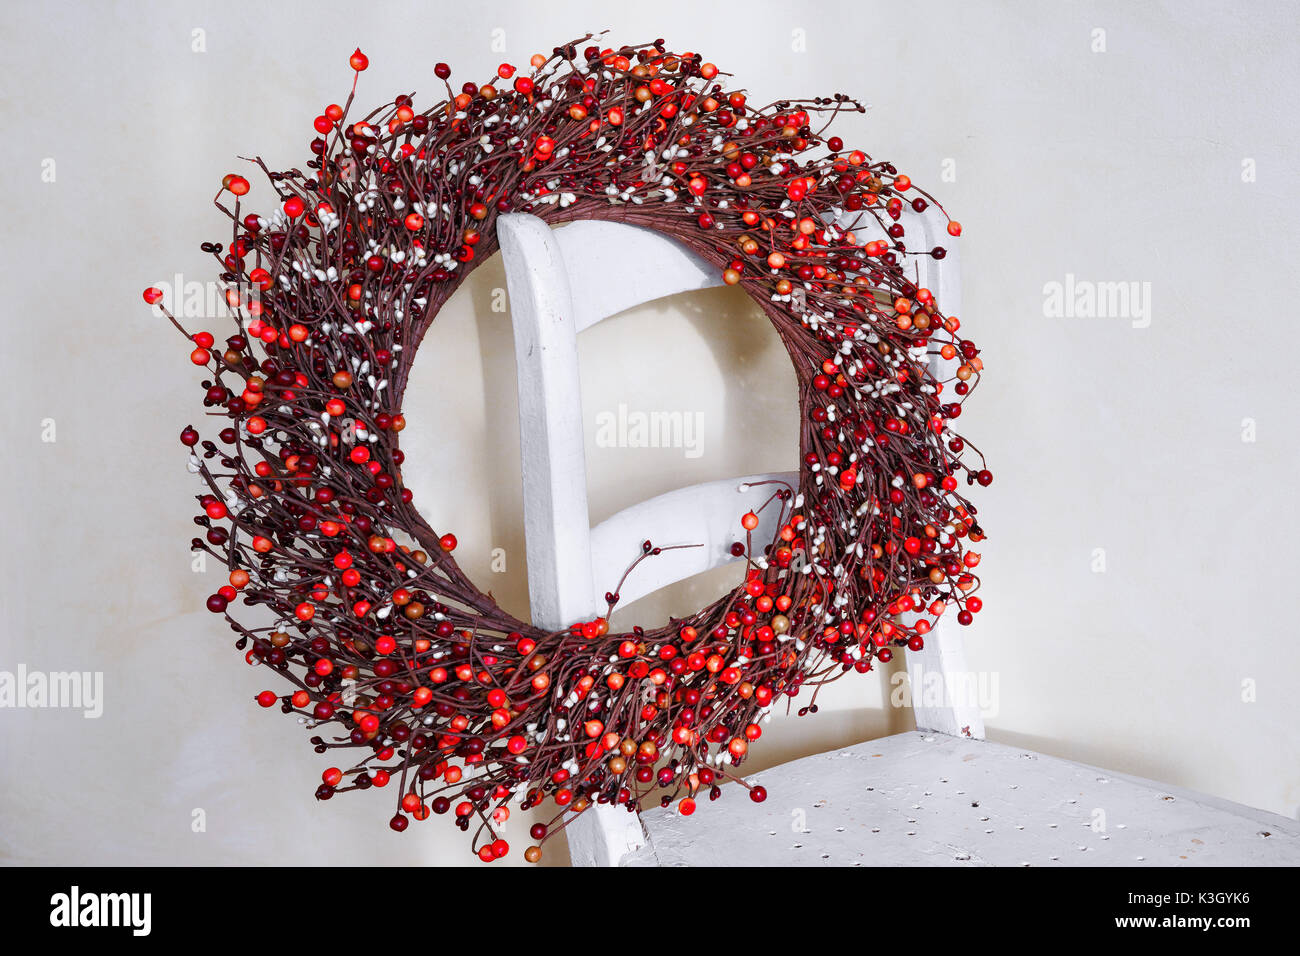 Red berry Christmas wreath hnging on the back of an old chair. Stock Photo